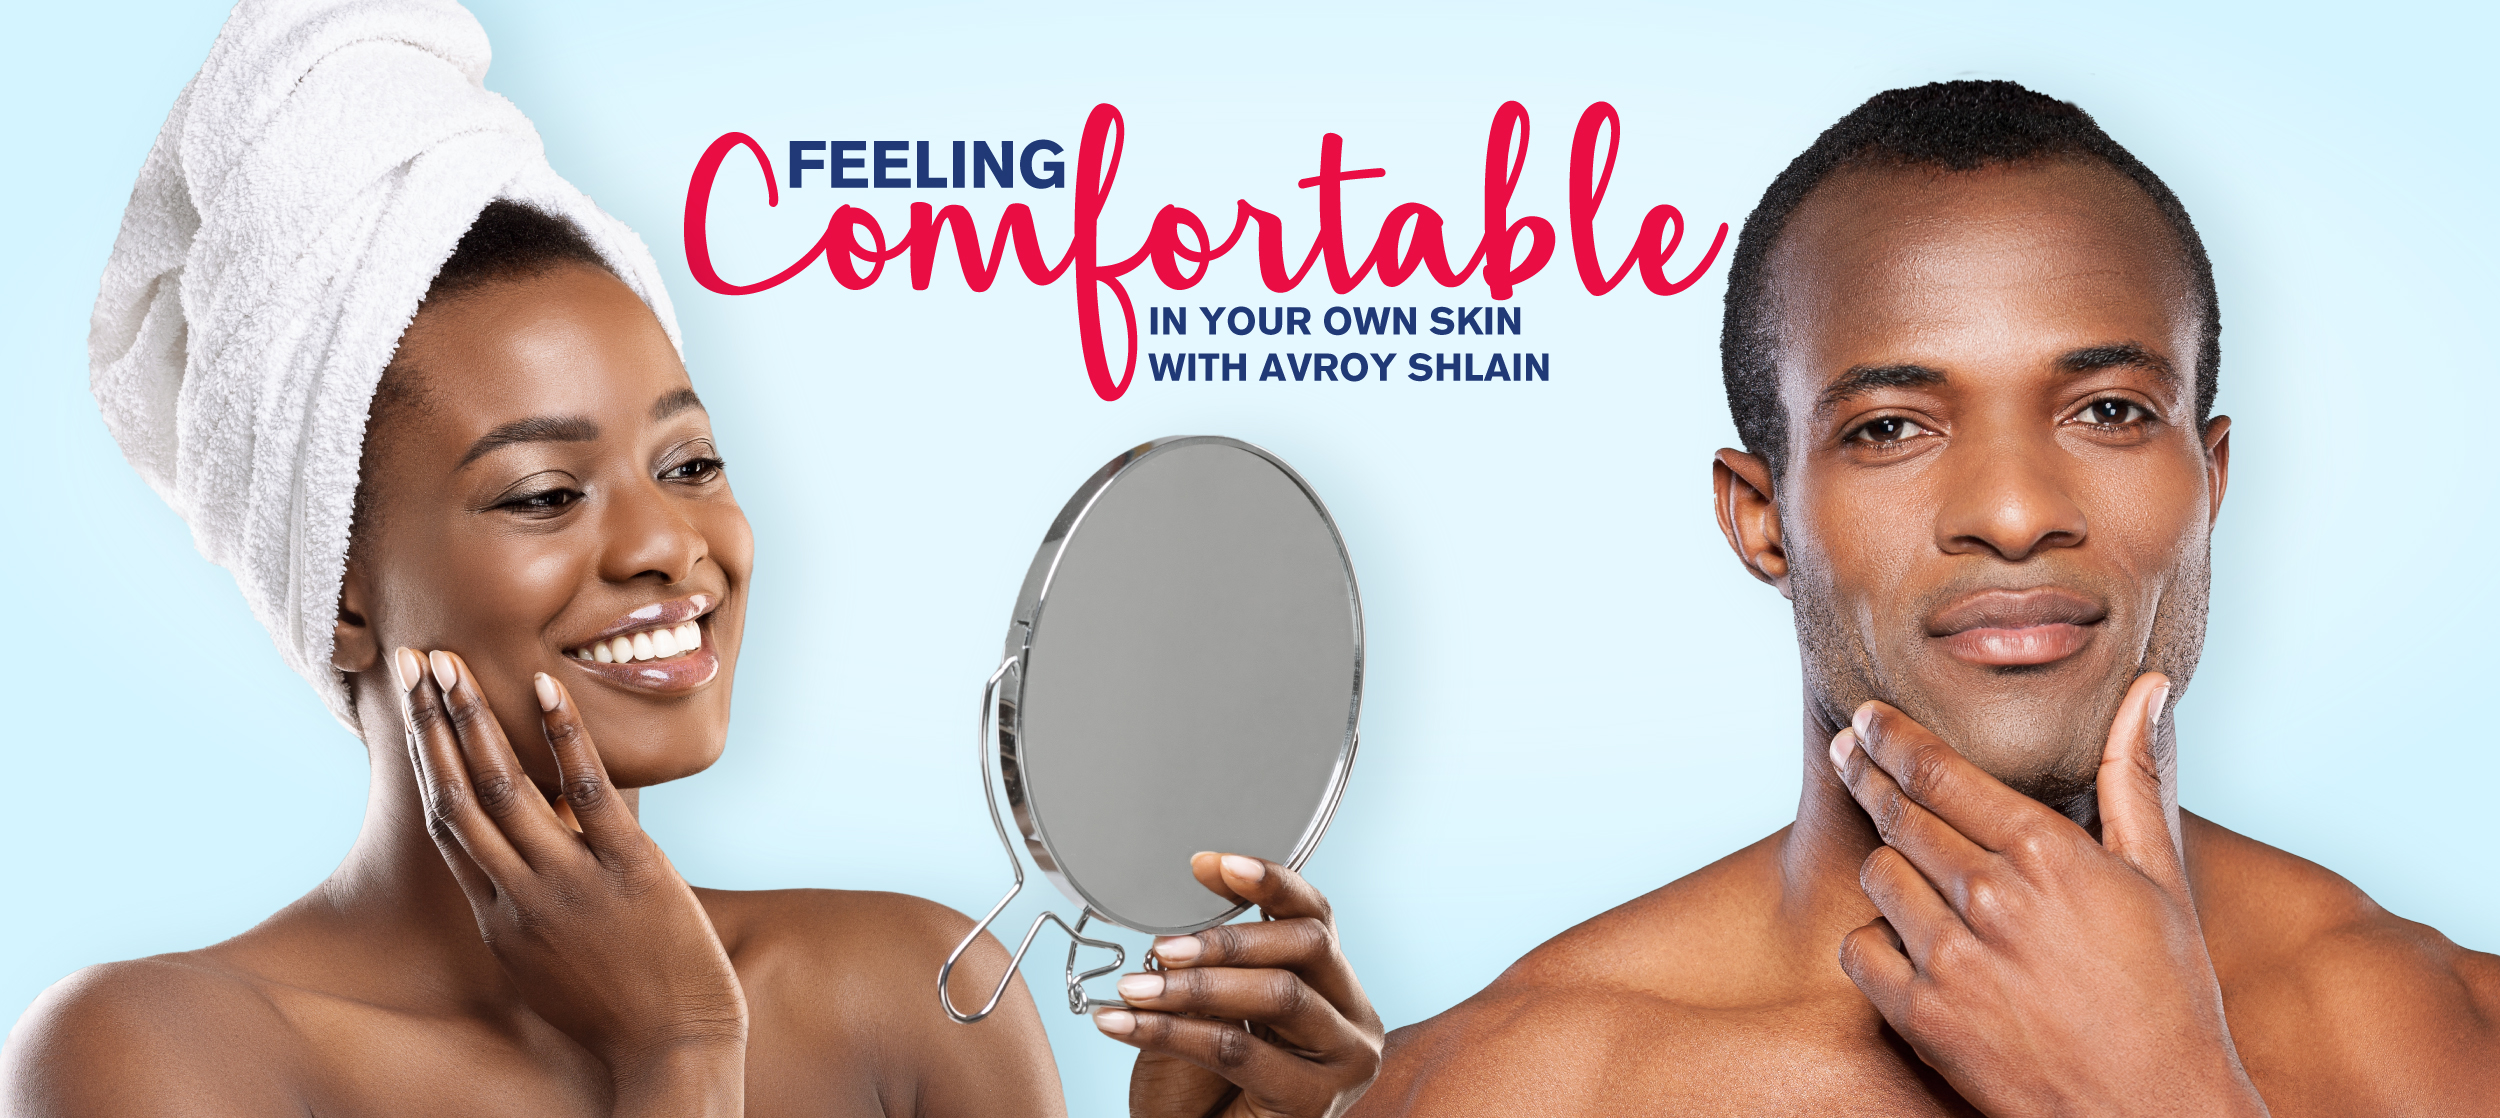 Feeling Comfortable in Your Own Skin with Avroy Shlain 